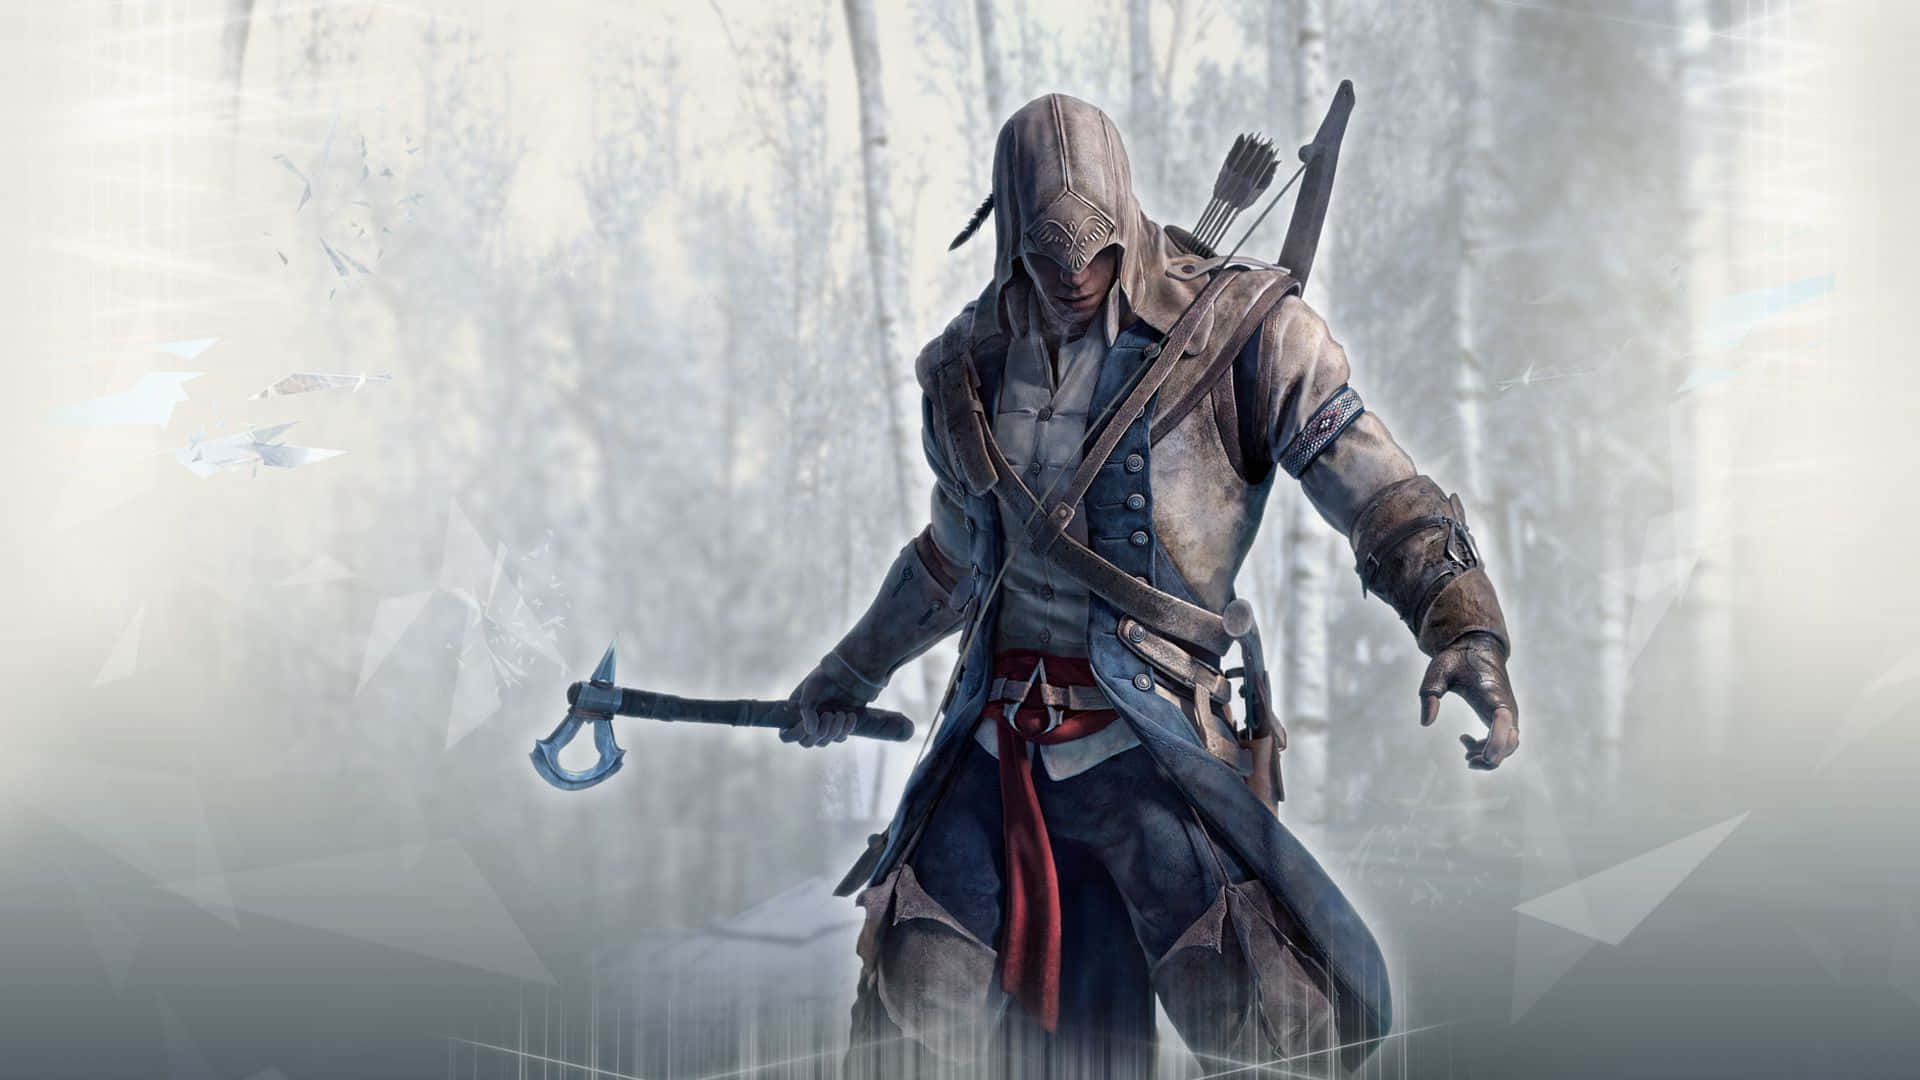 Intense Connor Kenway in Assassin's Creed III Wallpaper